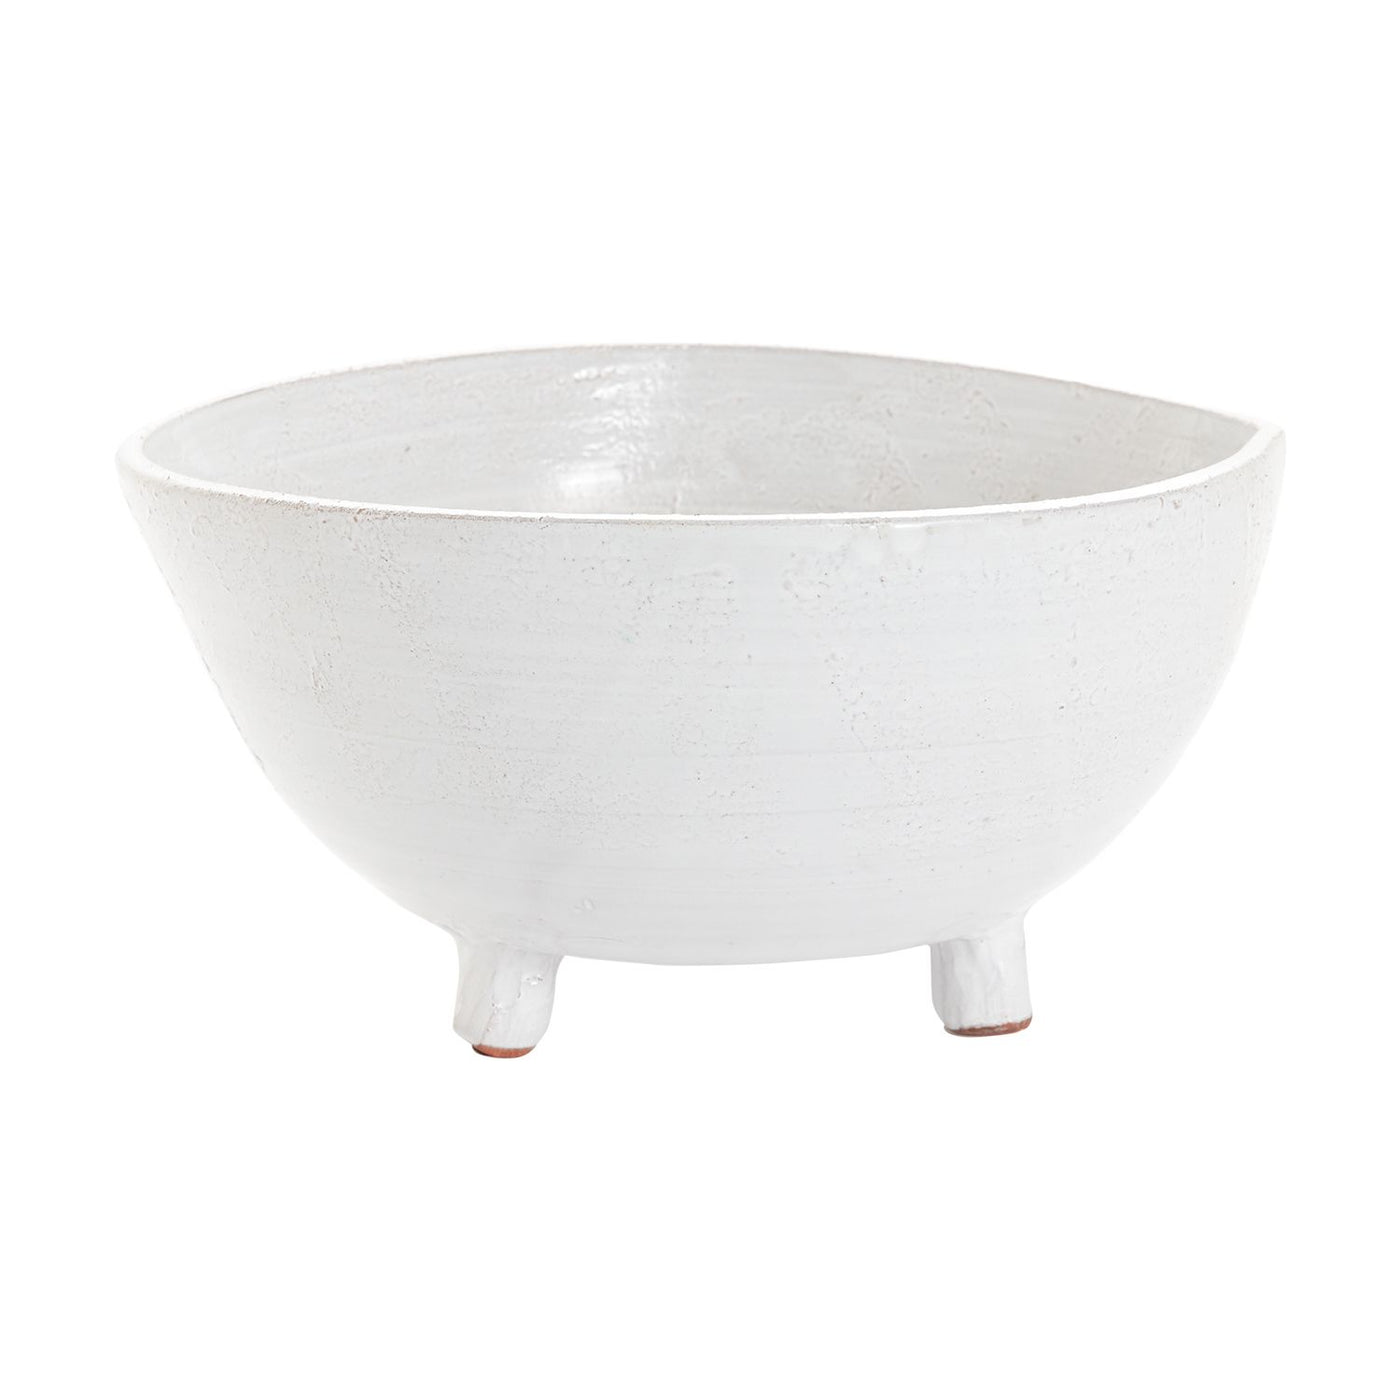 BOWL WHITE WITH LEGS